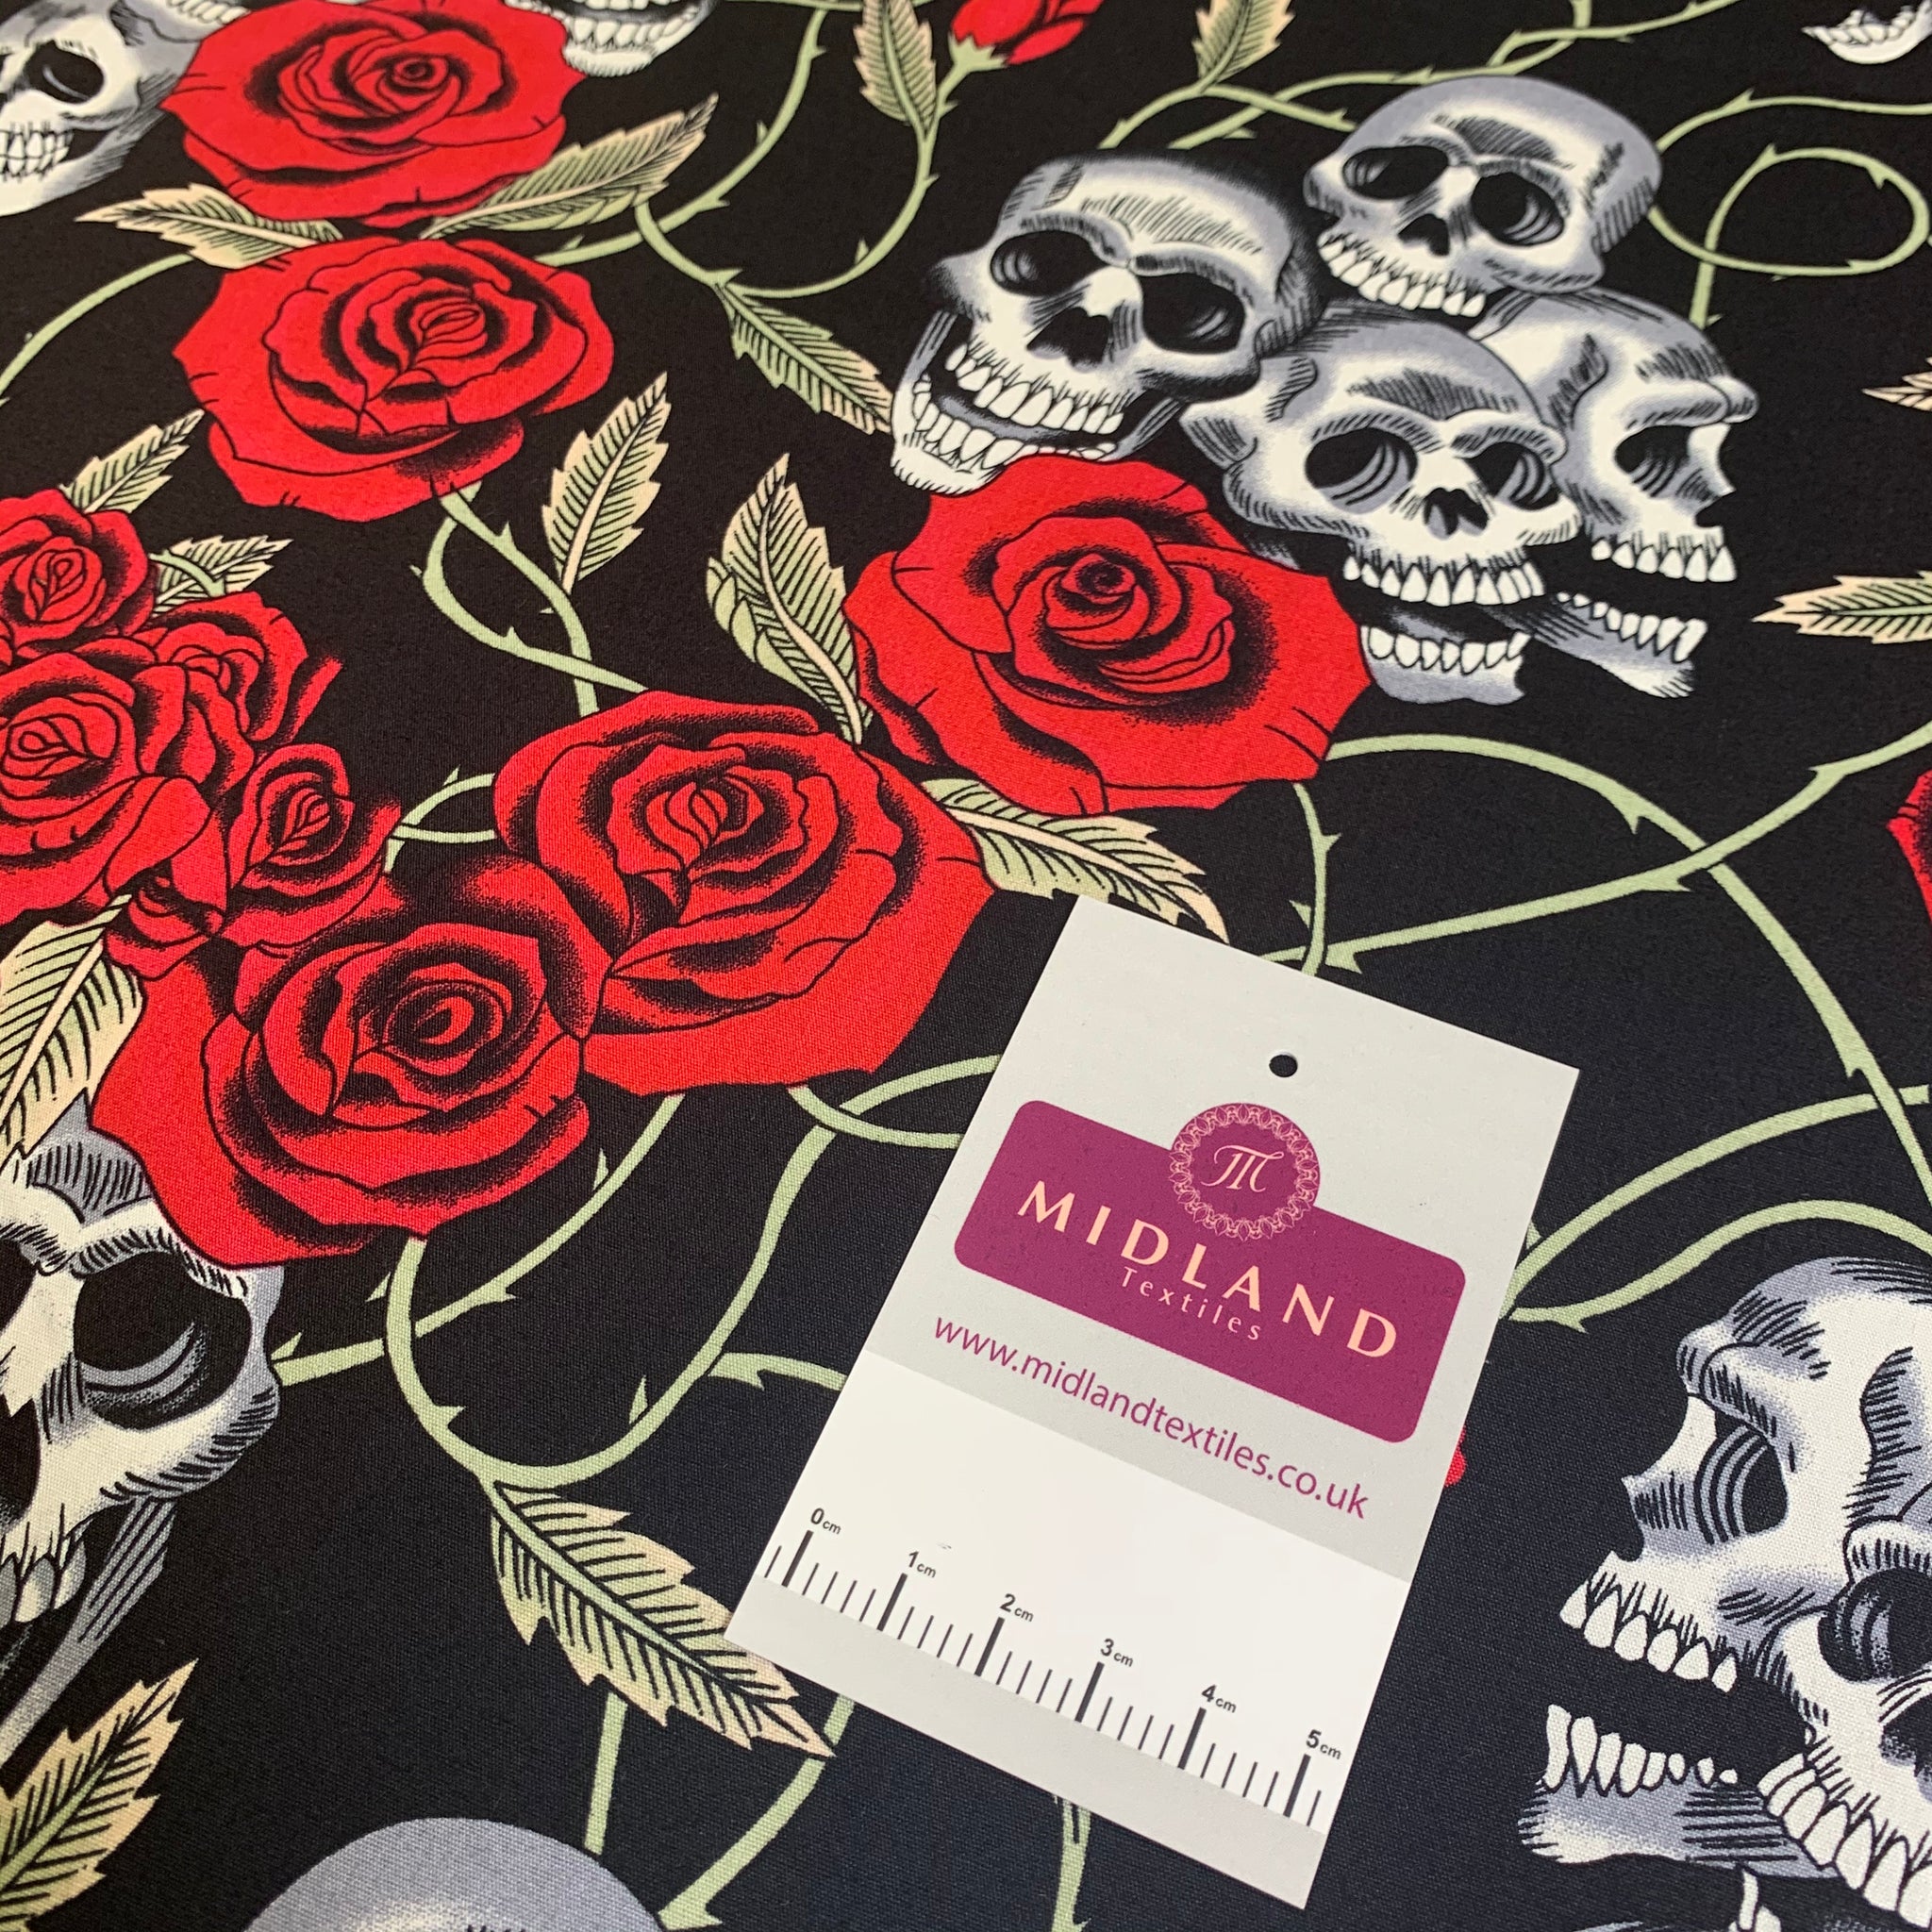 Halloween Skull and roses printed 100% cotton poplin craft mask Fabric MD1399 Mtex